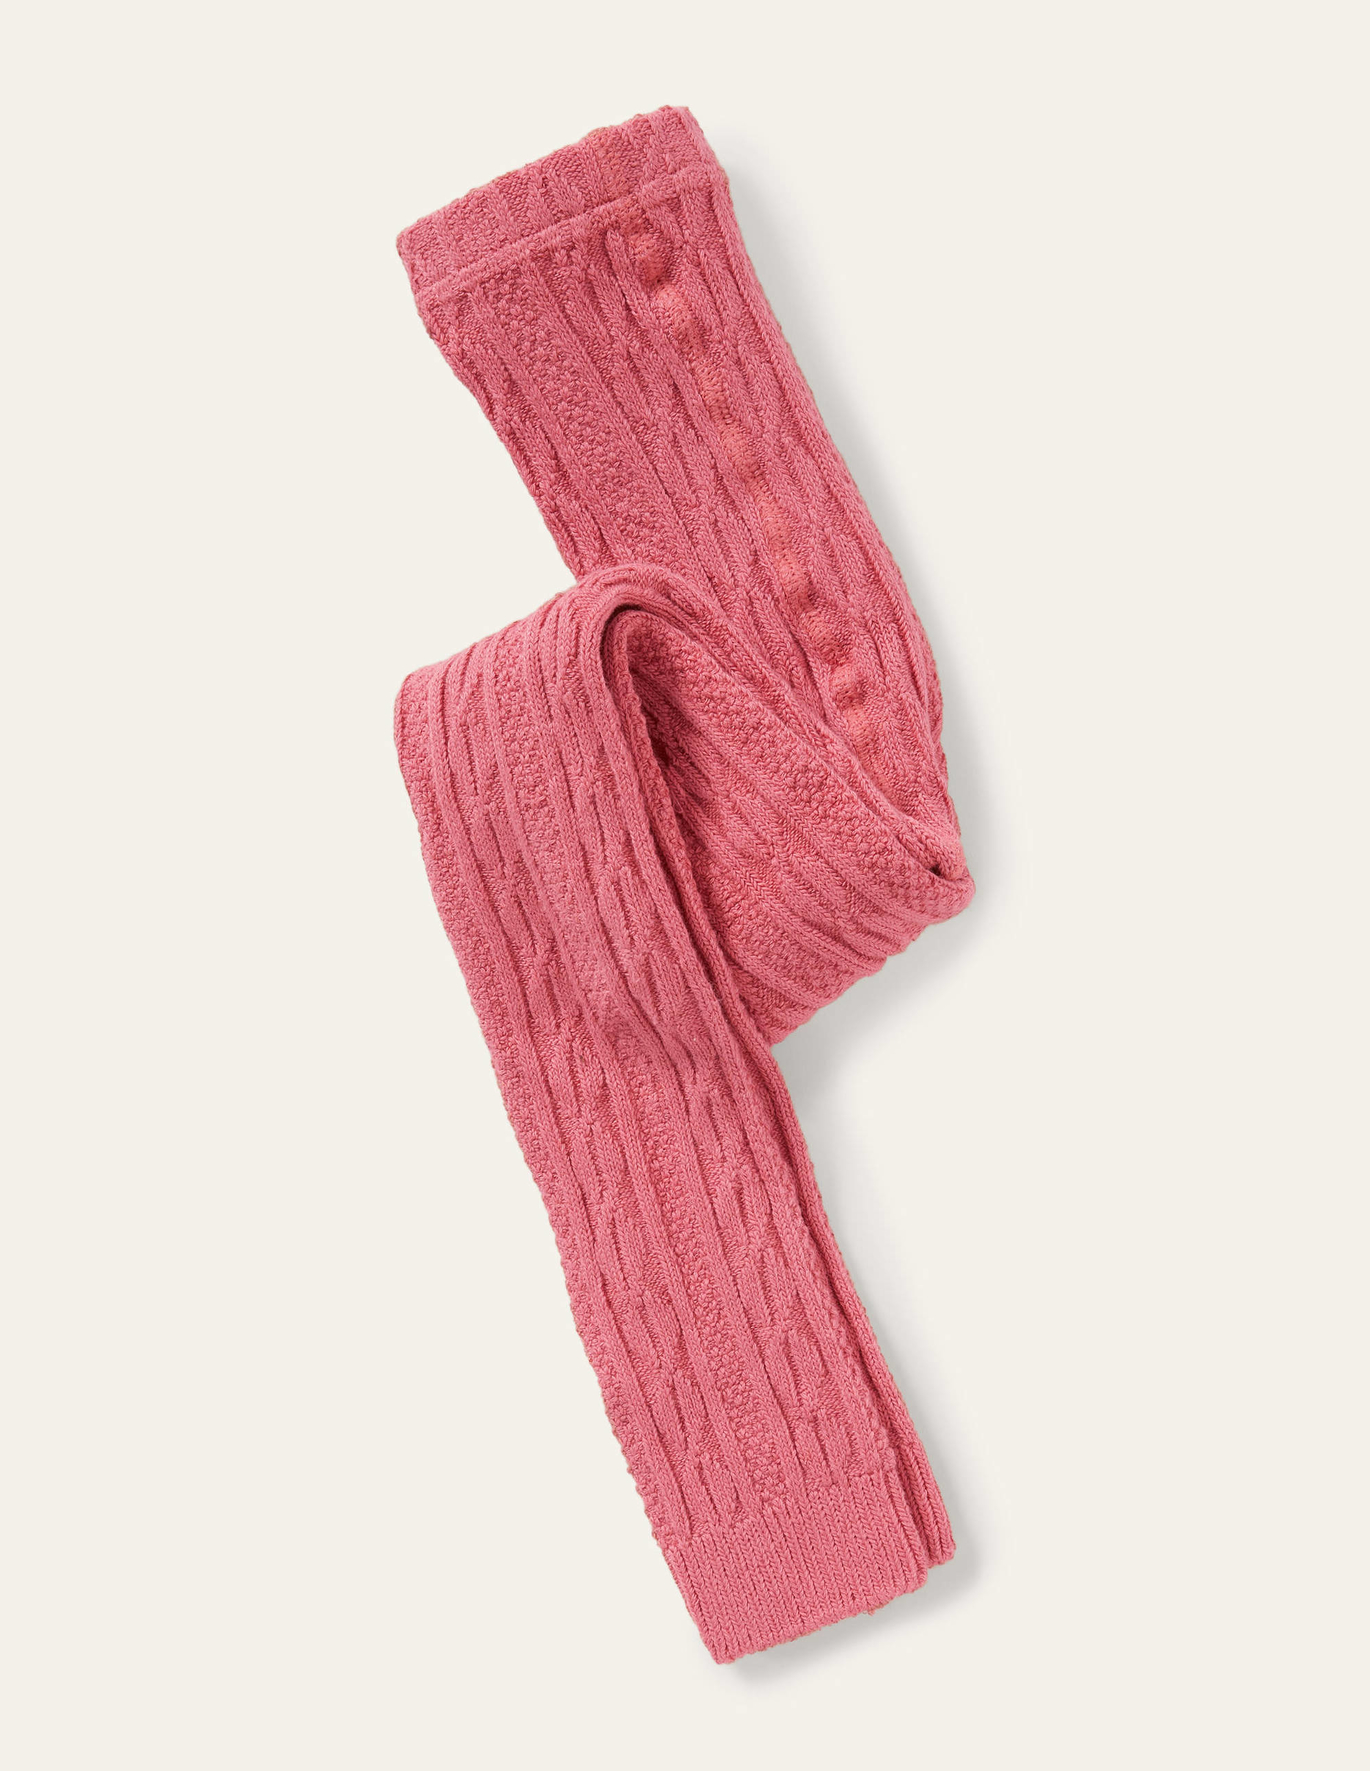 Boden Cable Footless Tights - Autumn Rose Pink